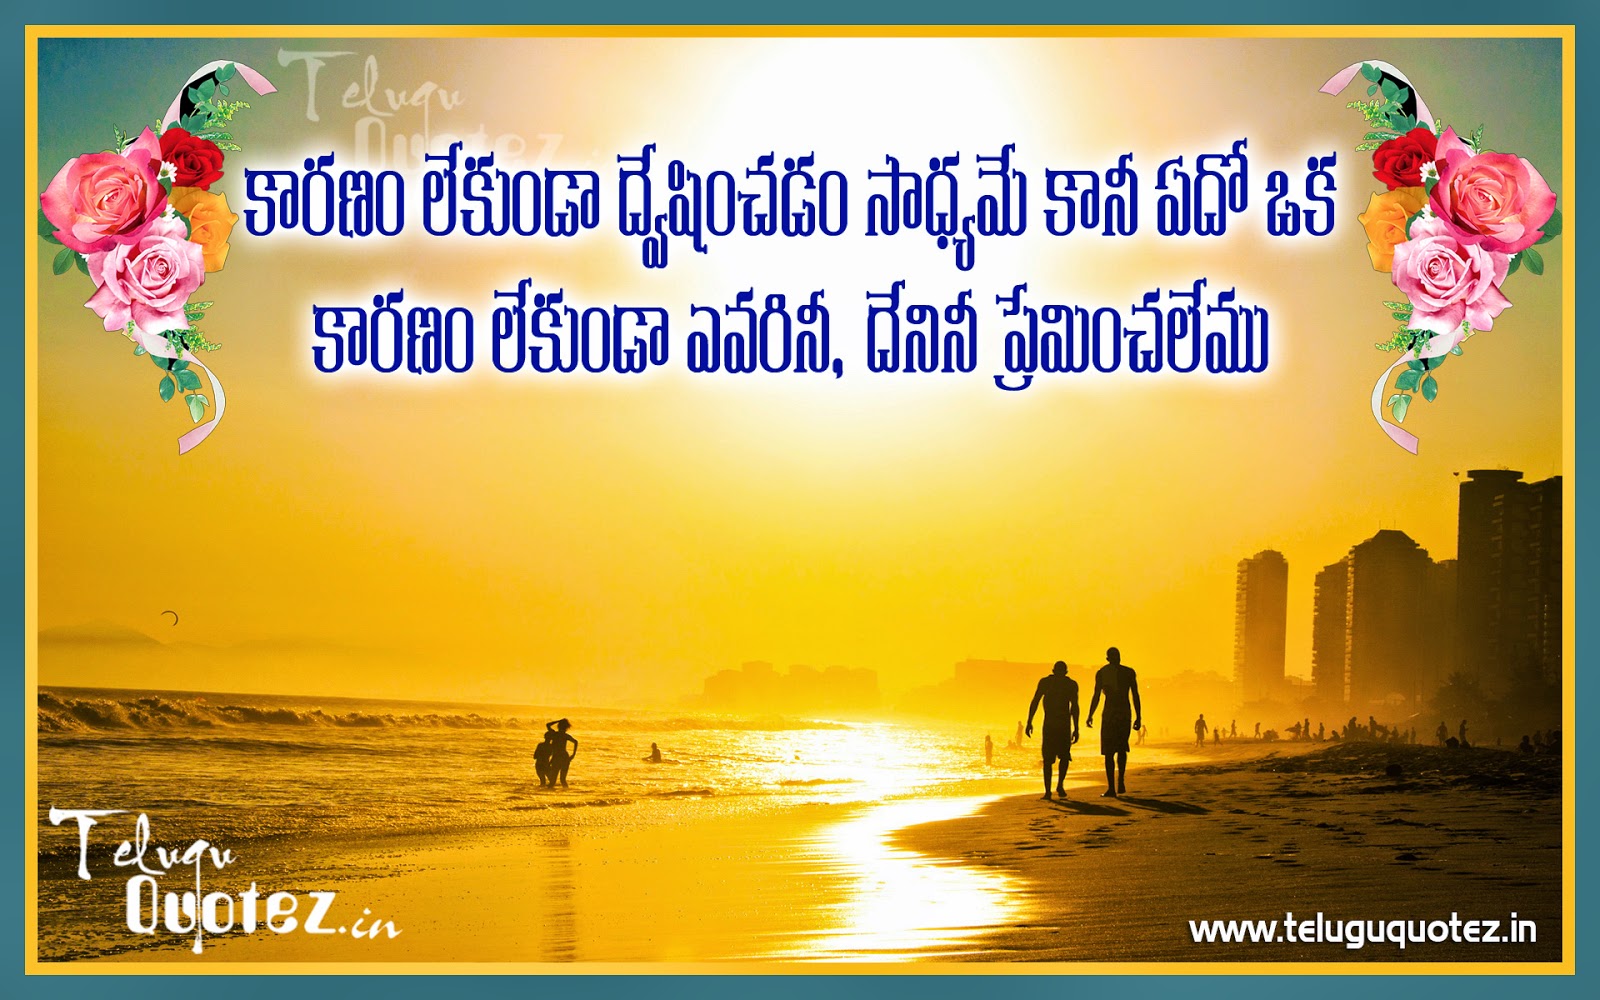 best saying Telugu Quotes on Love images | naveengfx